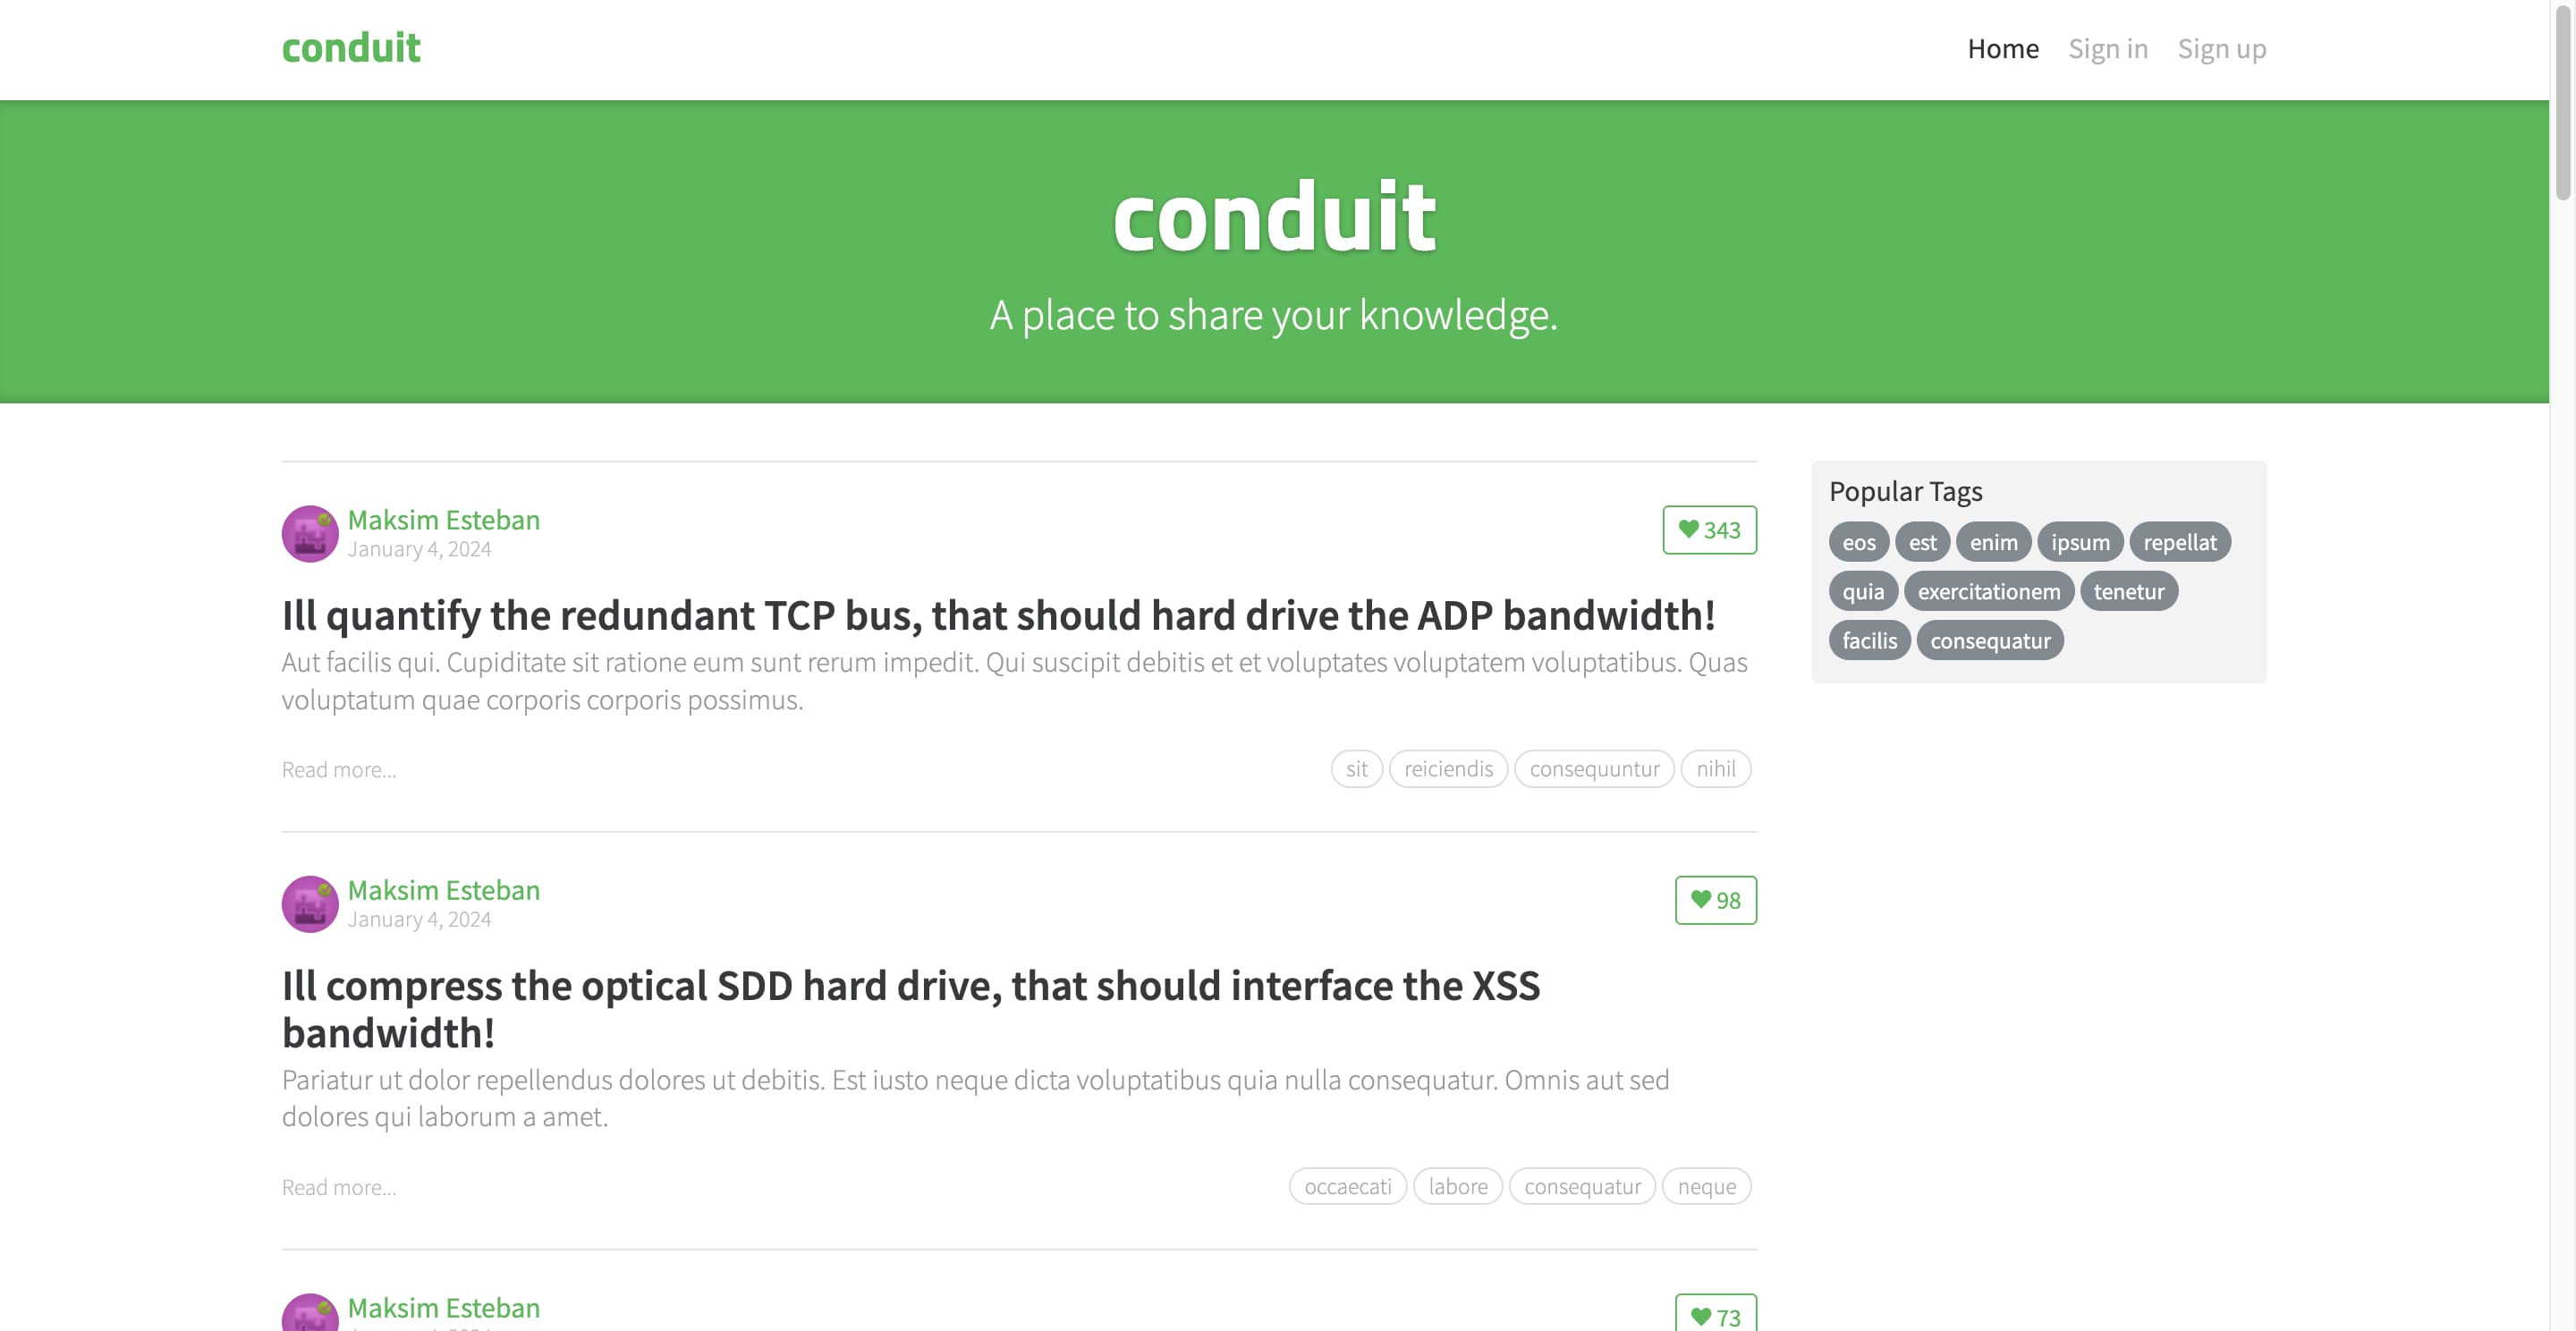 The feed page of Conduit, including the header, the feed, and the tags. The tabs are still missing.